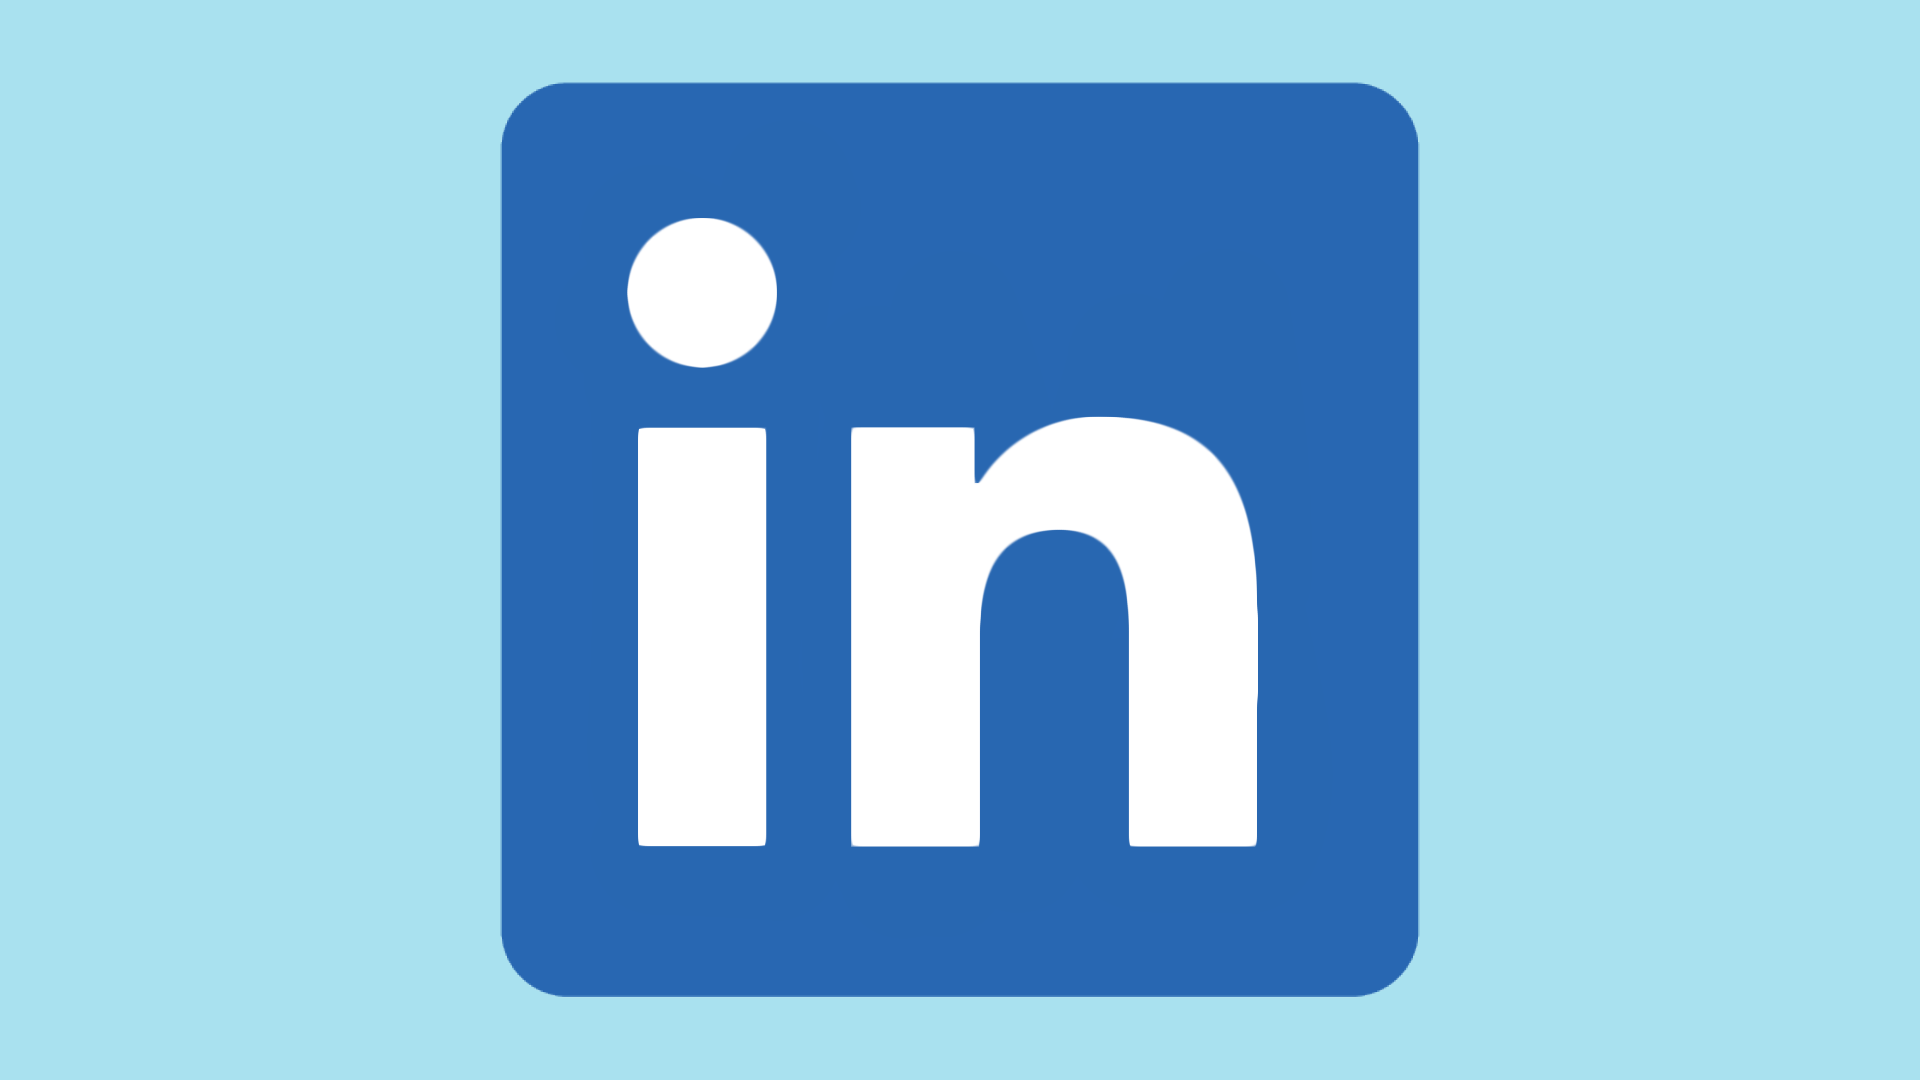 Animated illustration of the LinkedIn logo, with "out" replacing "in".